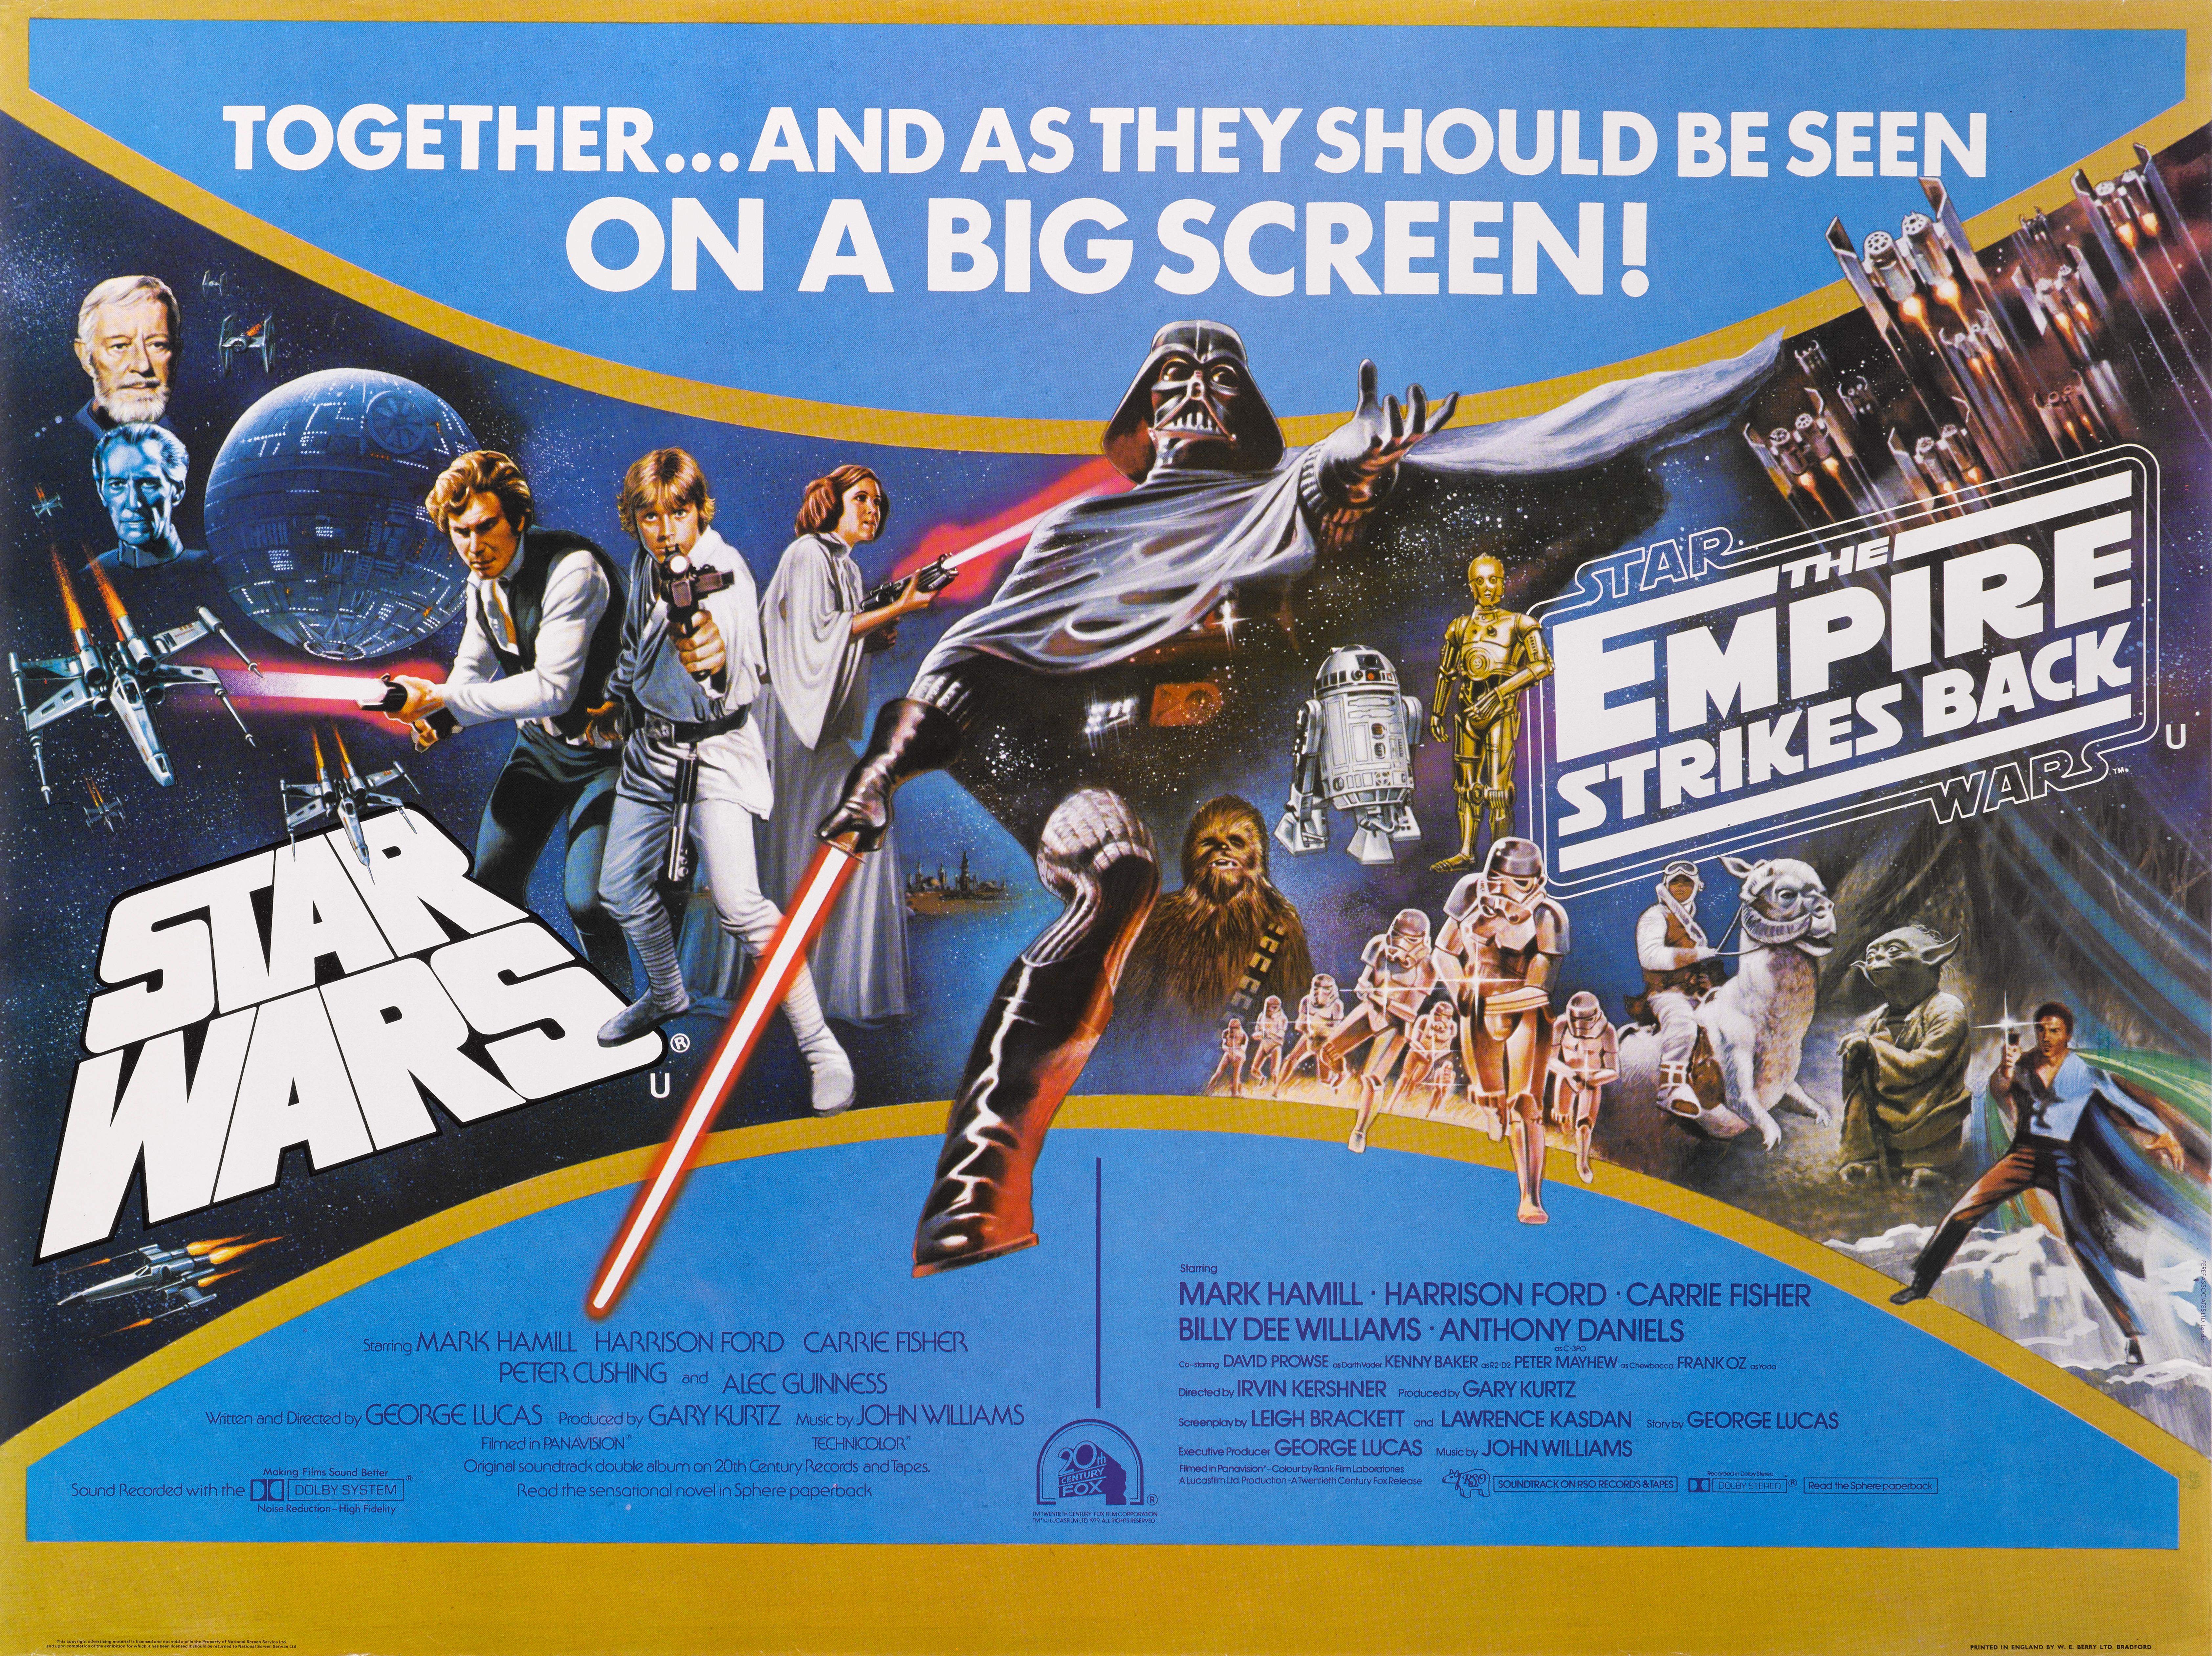 Original British double bill film poster for Star Wars and The Empire Strikes Back.
Both films starred Mark Hamill, Harrison Ford, Carrie Fisher.
This poster is unfolded and would be shipped rolled in a strong tube.